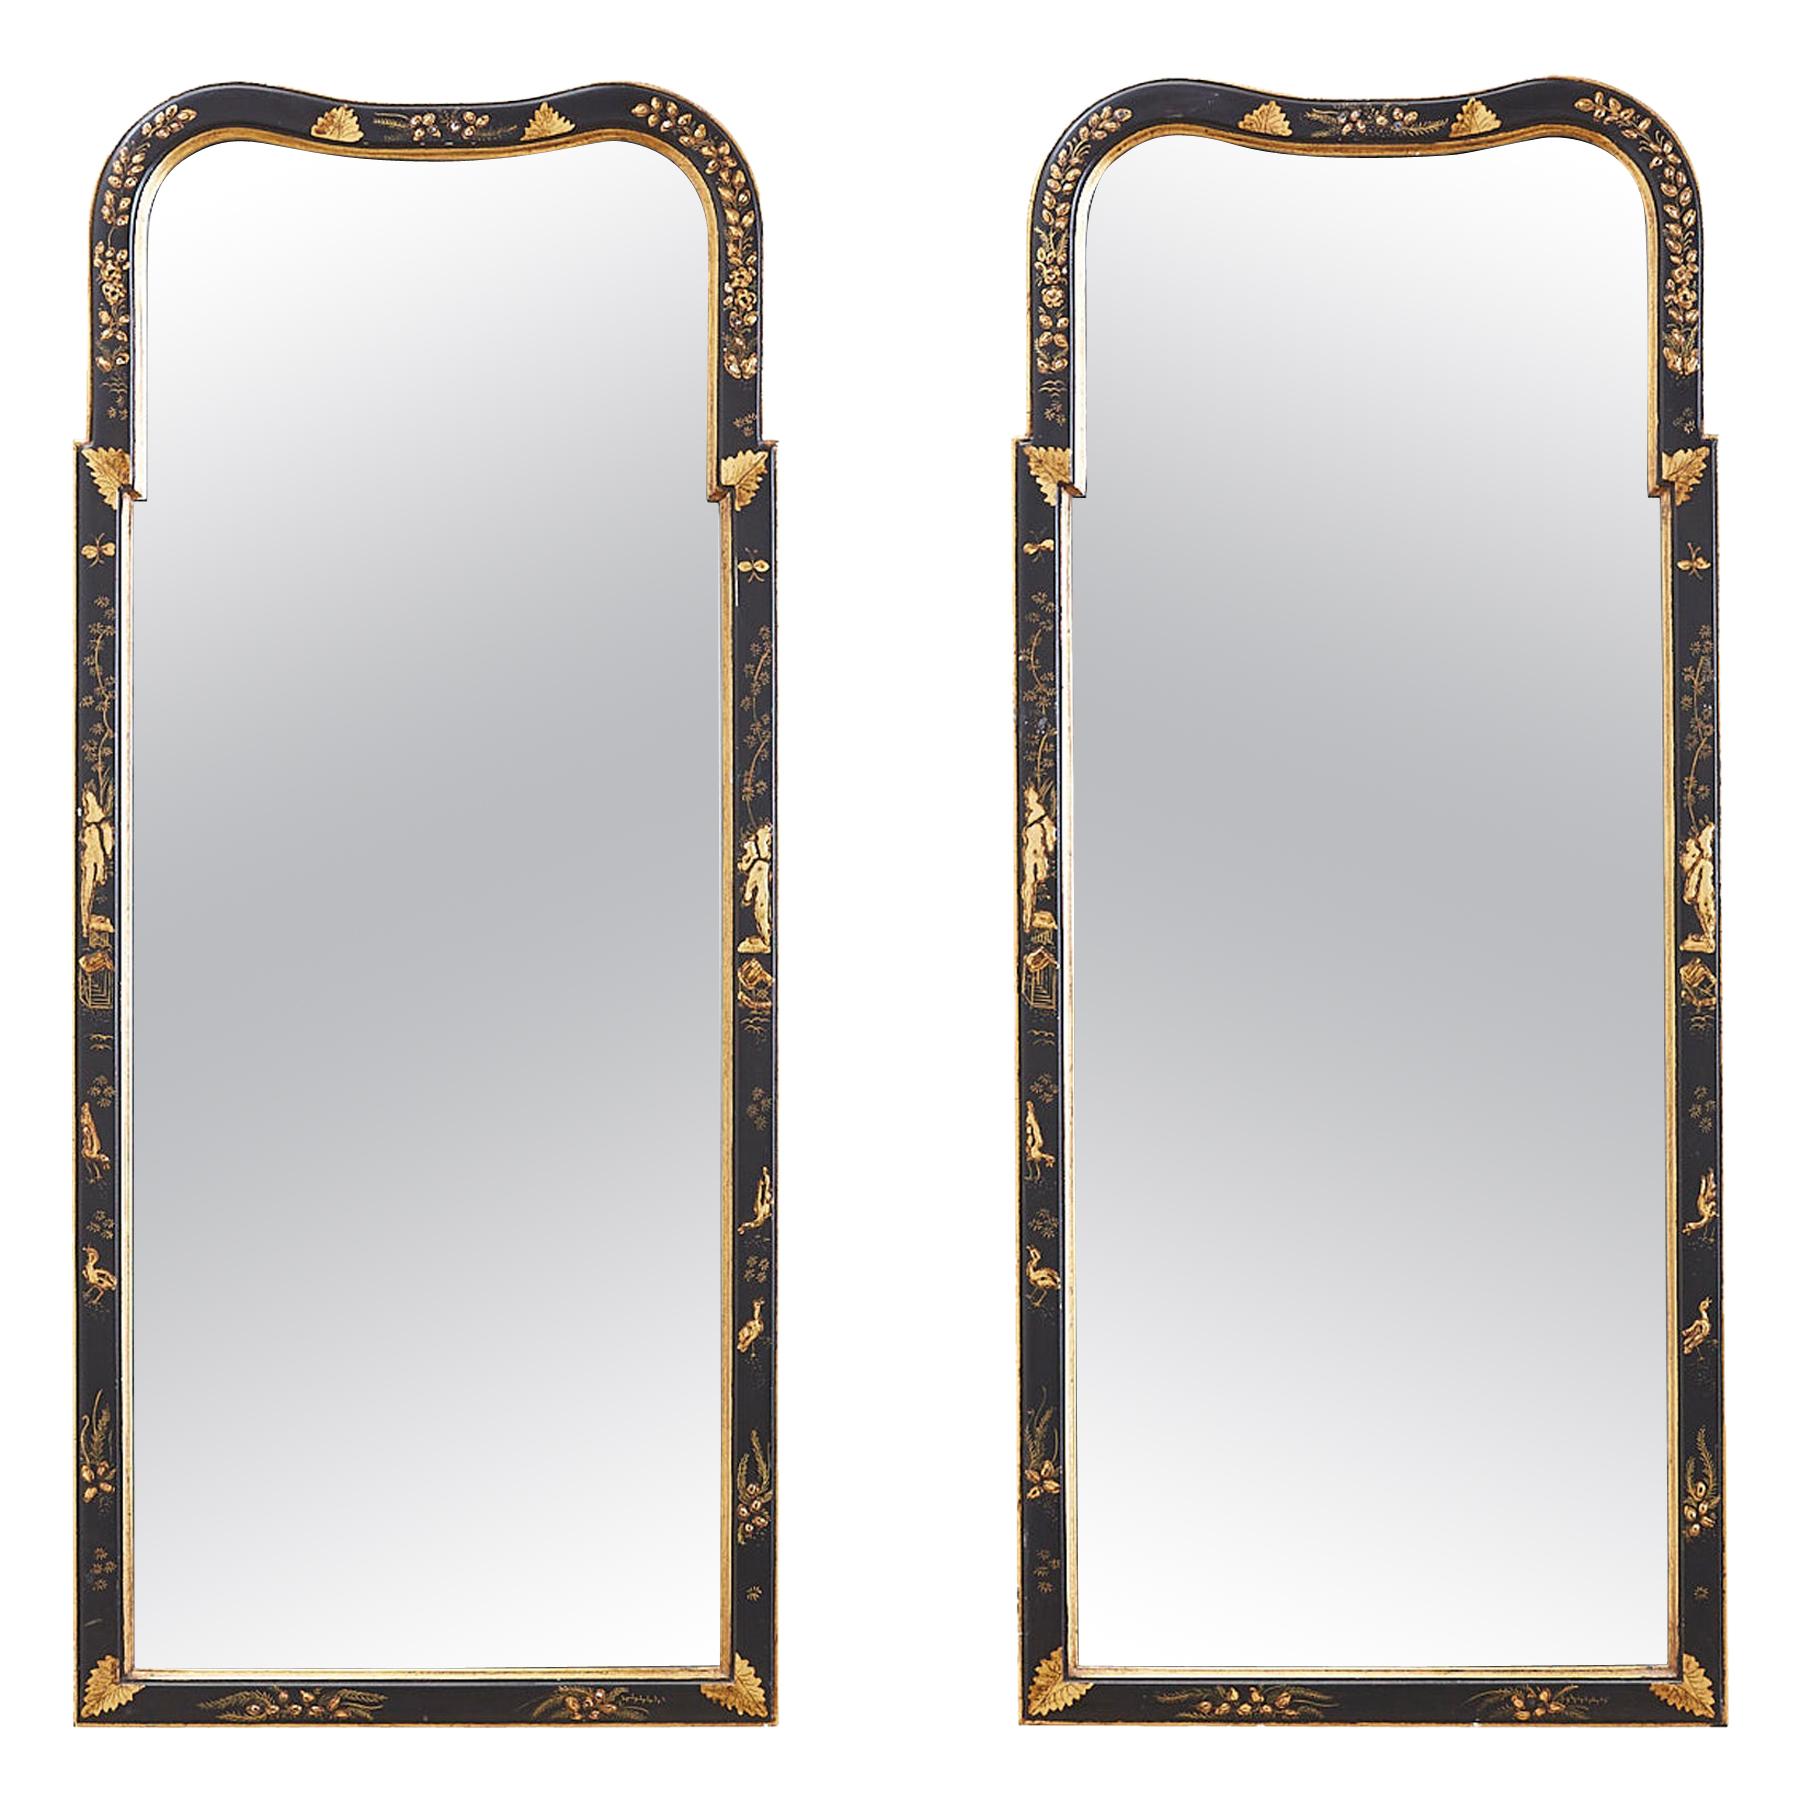 Pair of Chinoiserie Queen Anne Style Parcel-Gilt Mirrors